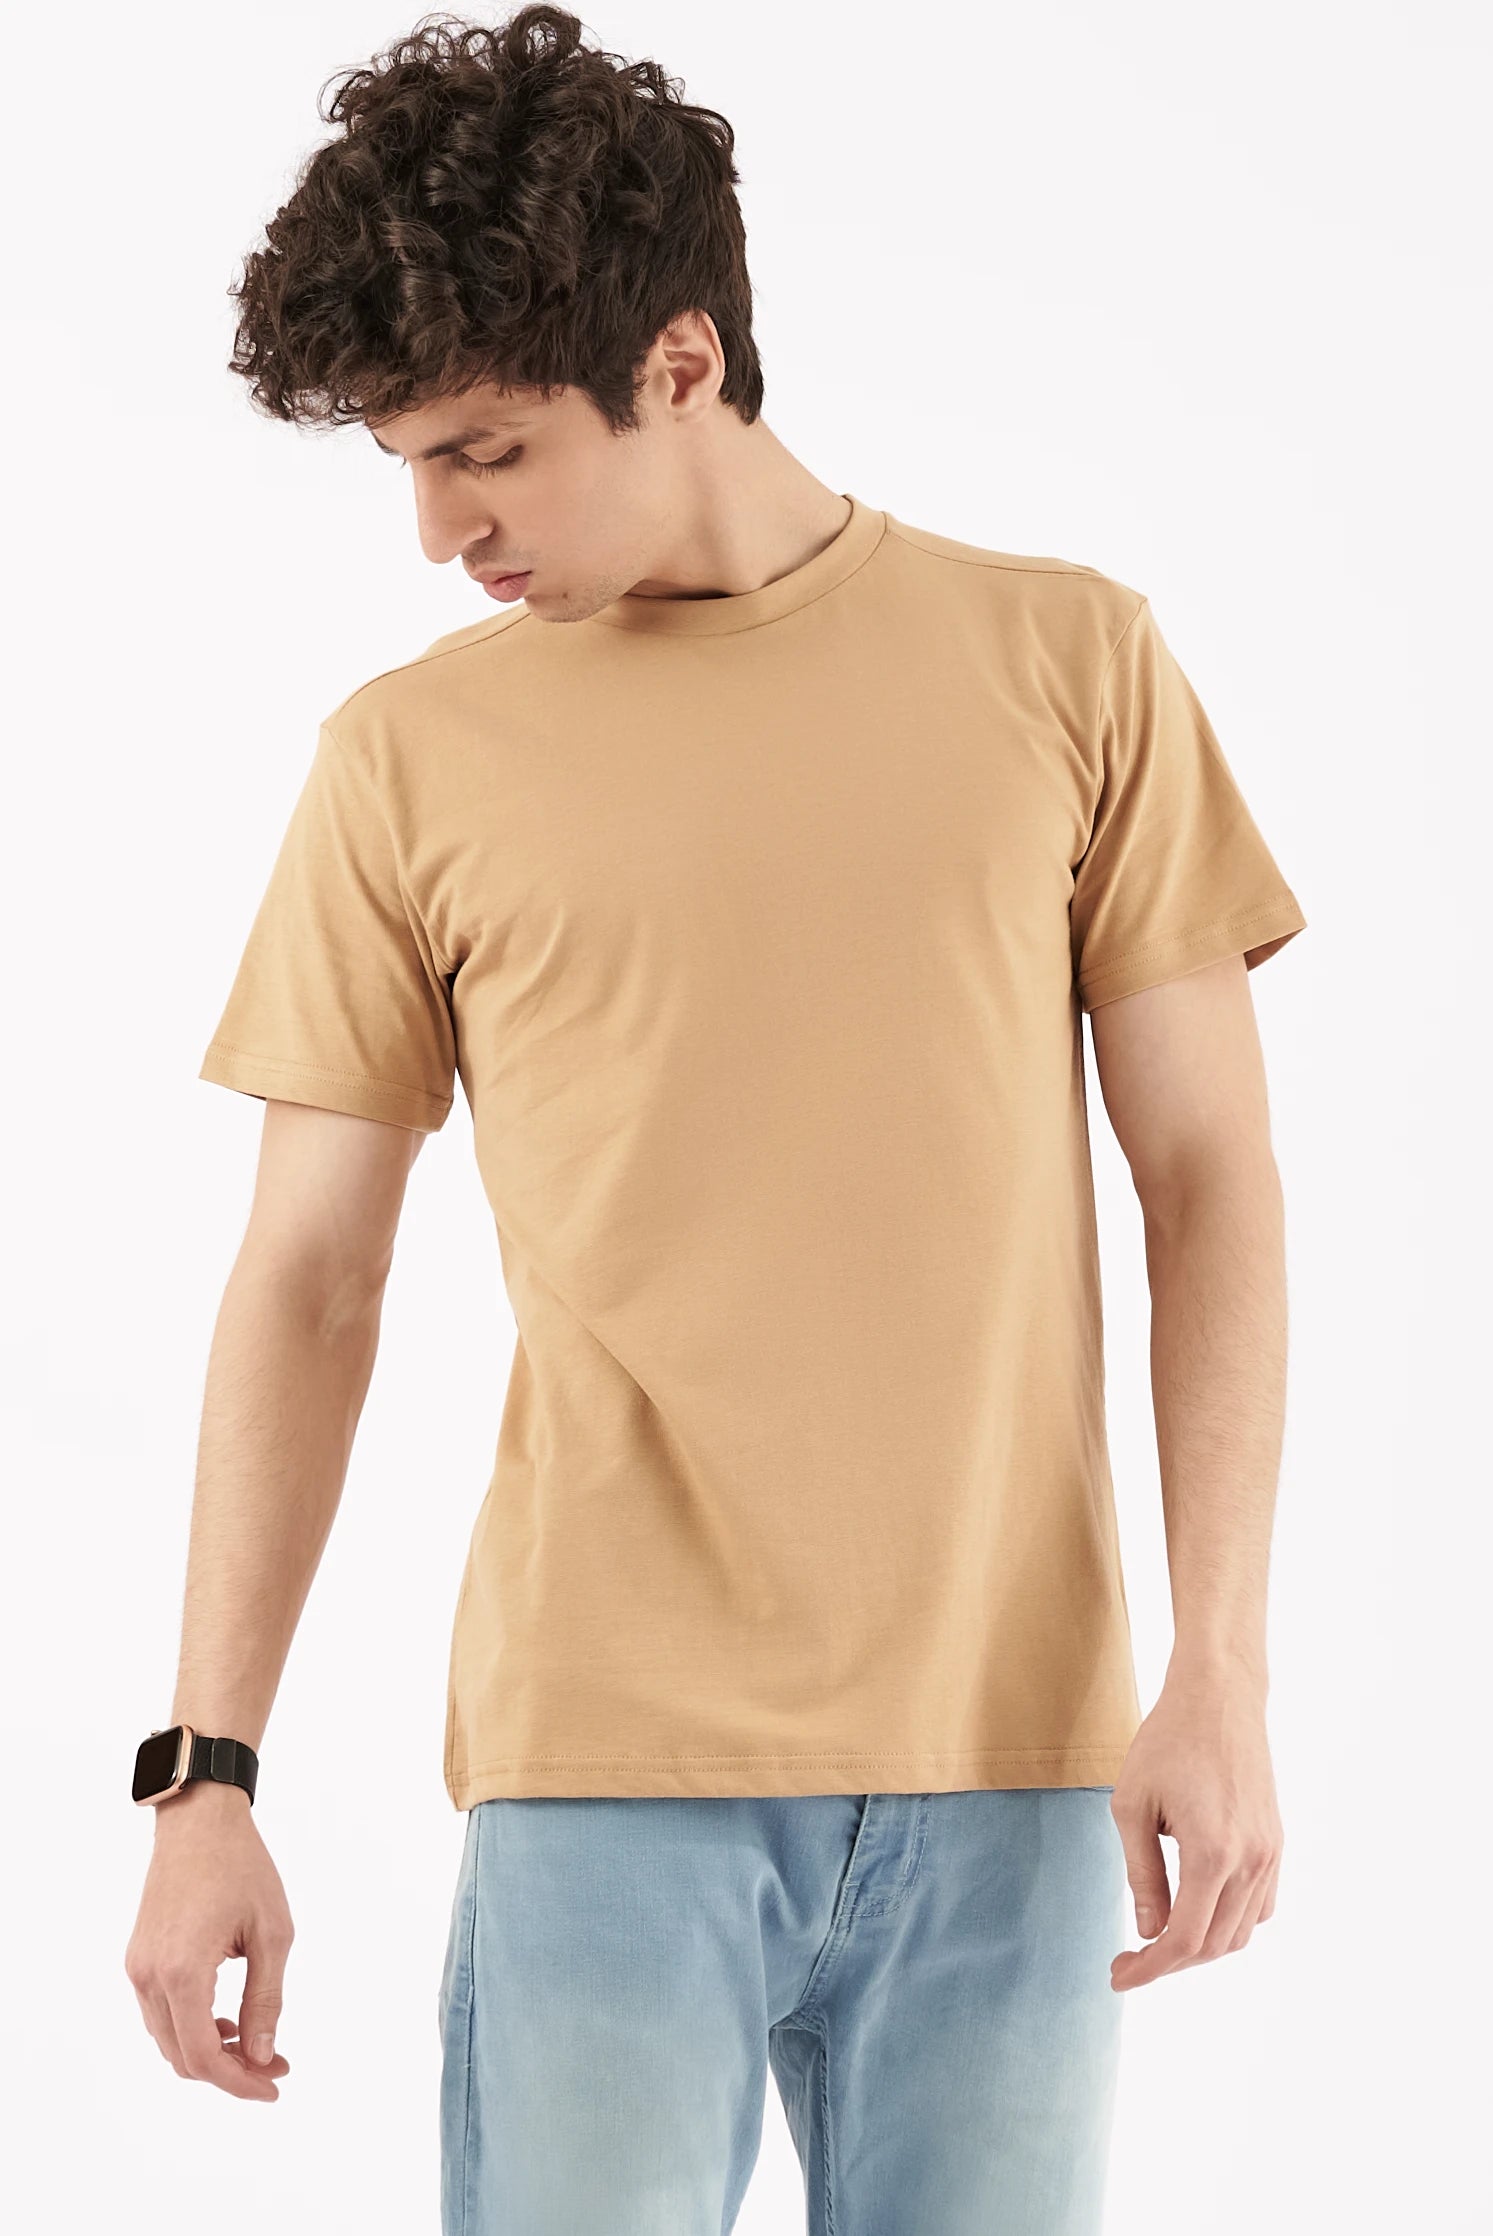 Men's Forbearance Graphic T-Shirt Sand